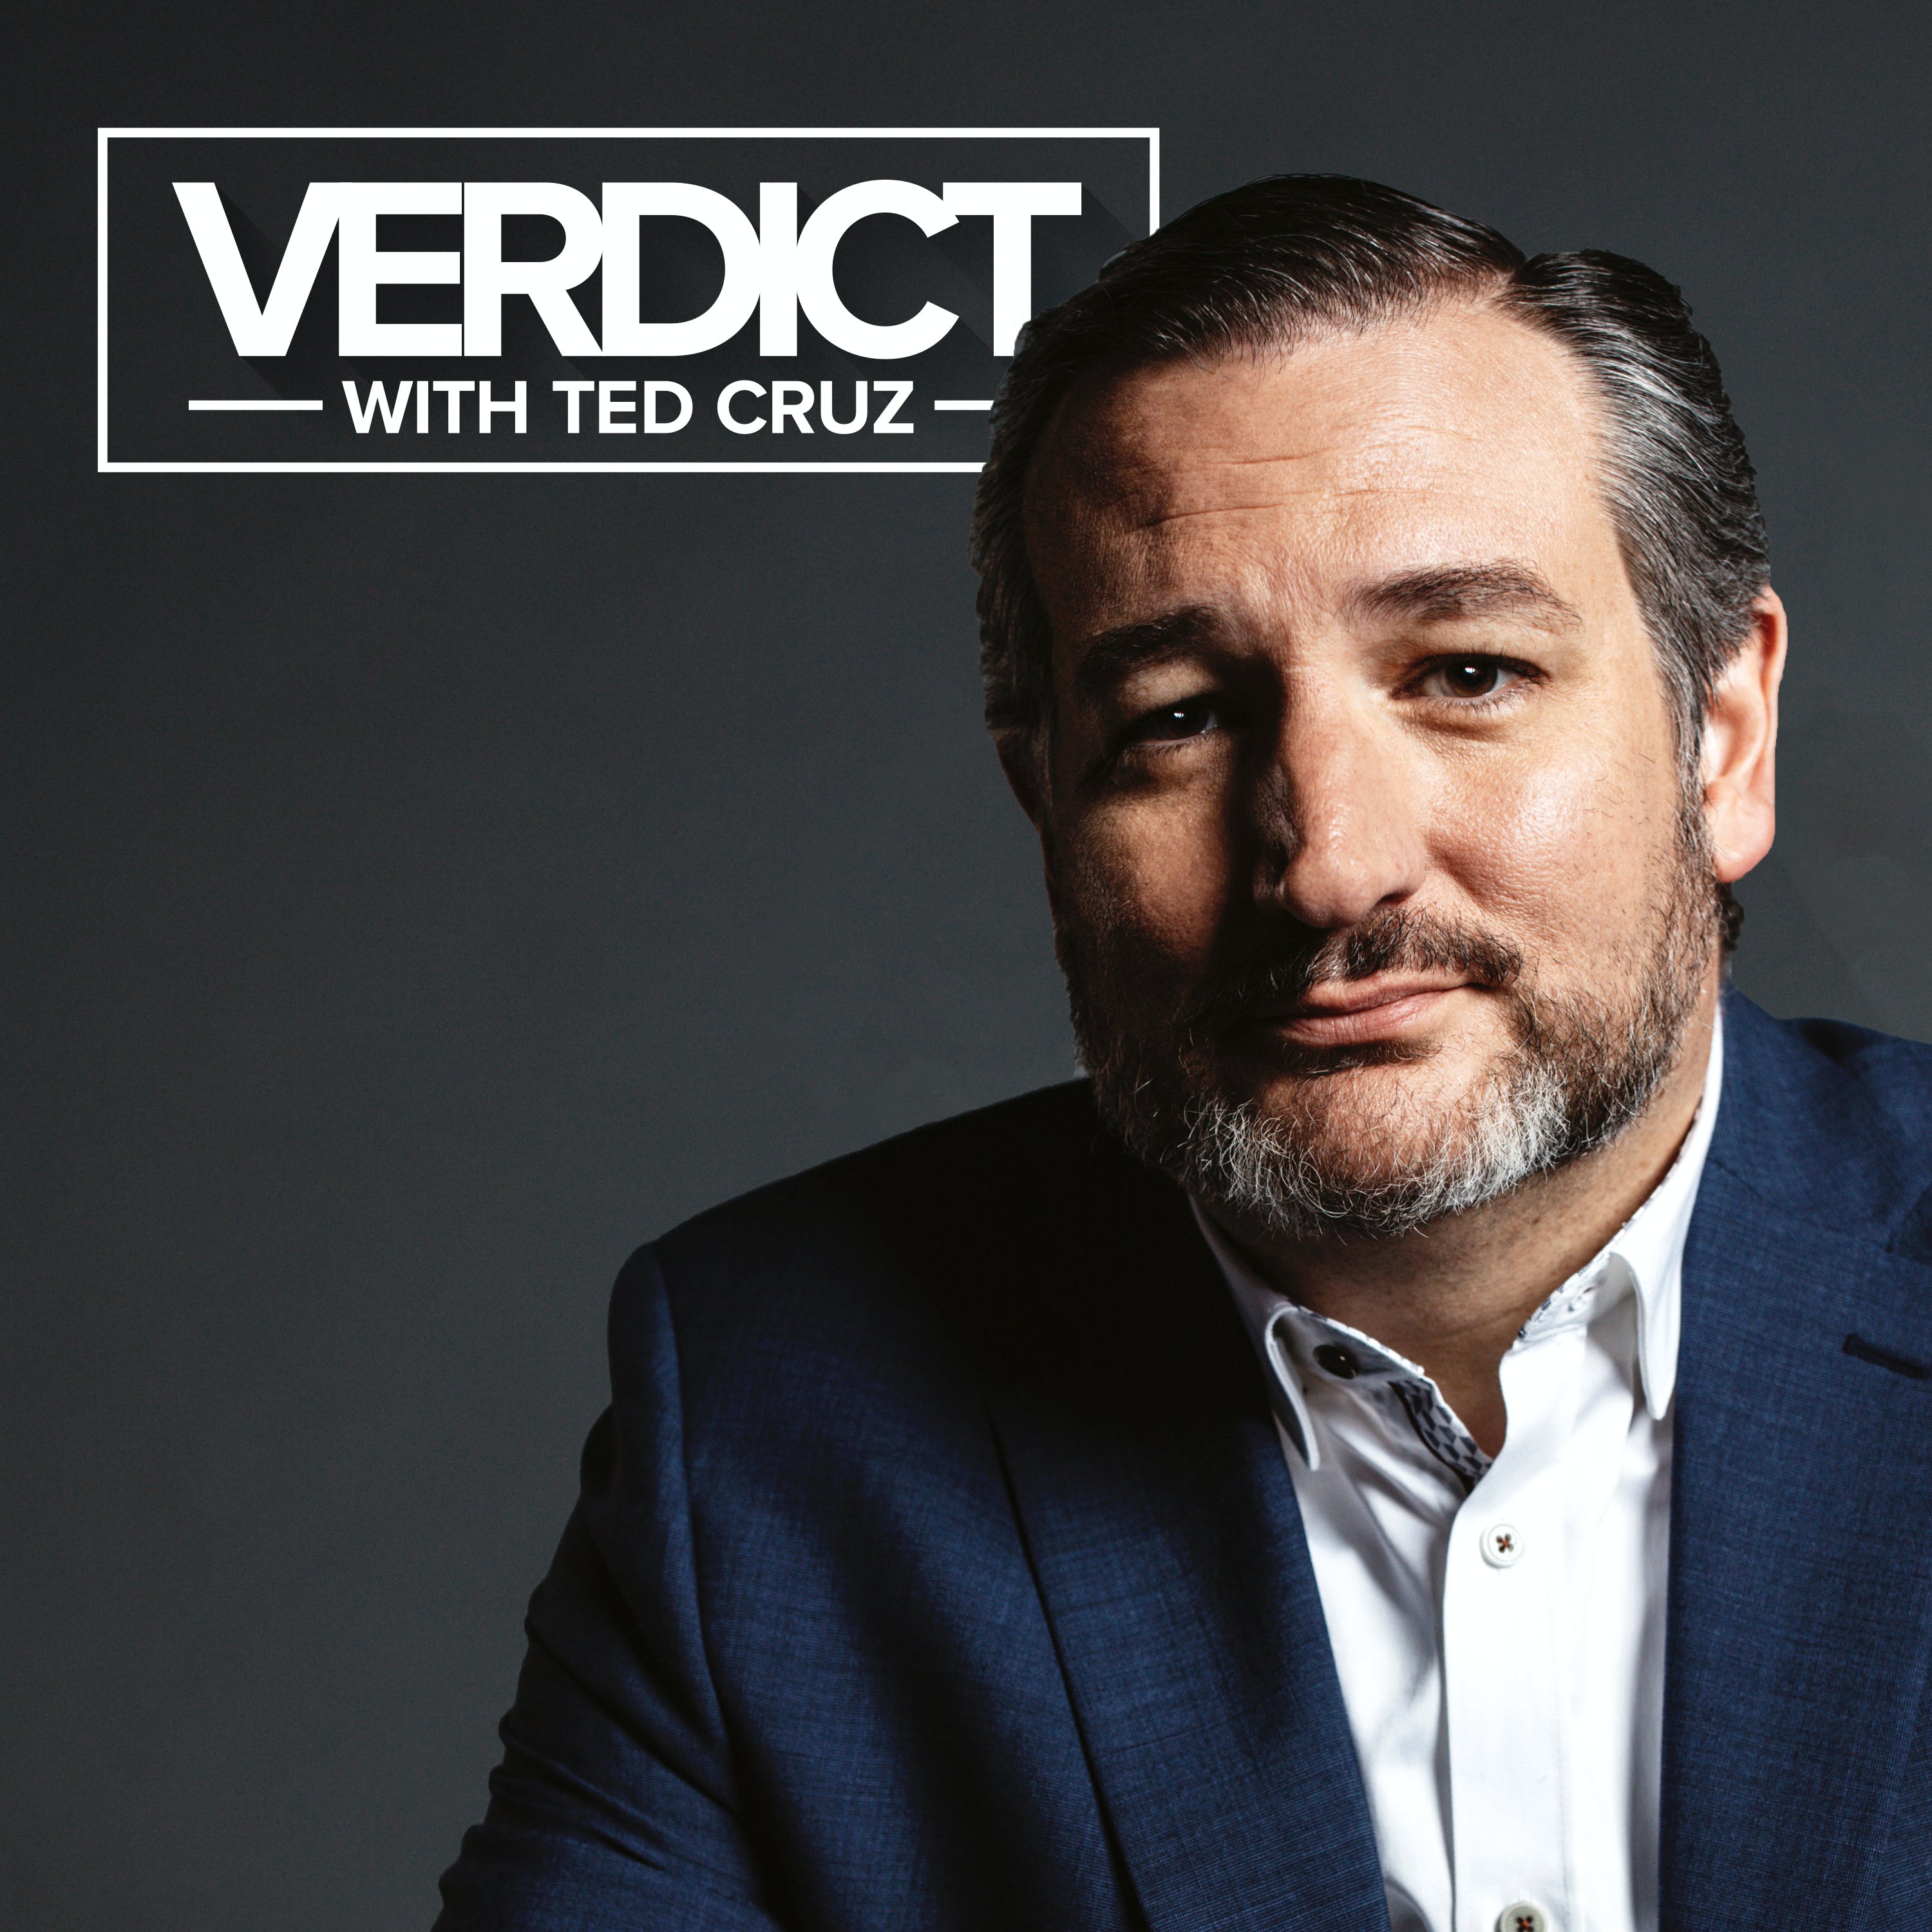 Democrats Are Fading Ahead Of Election Day, Senator Cruz Gives You His Predictions On The Big Races & How Big THE RED WAVE COULD BE!